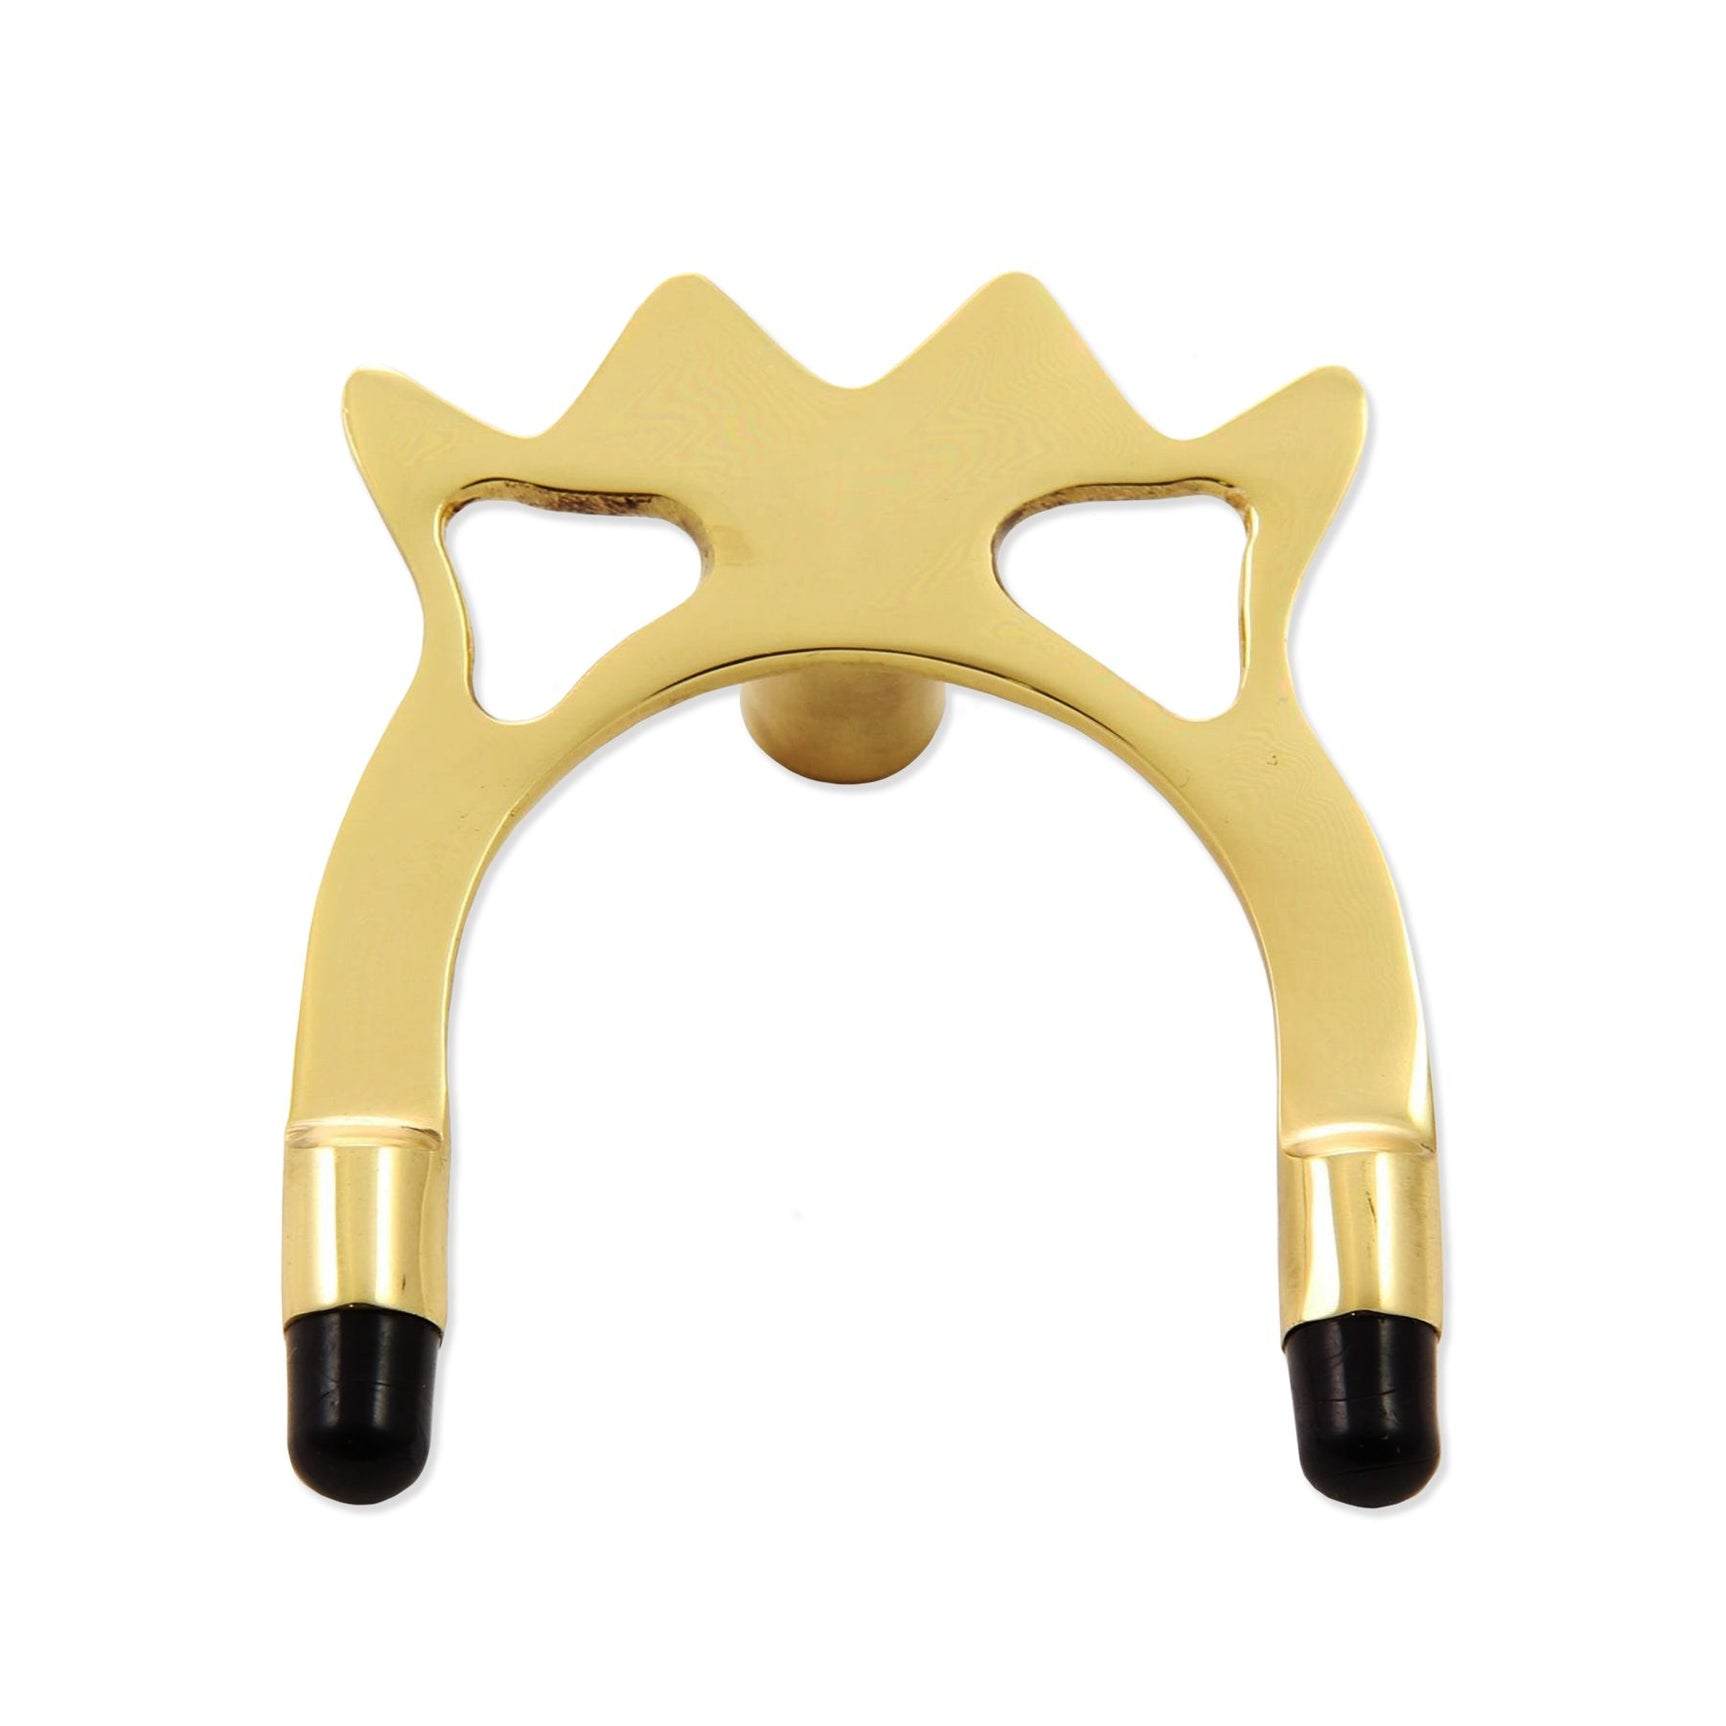 Gold-Plated Spider Rest Head for Snooker & Pool with Protective Feet